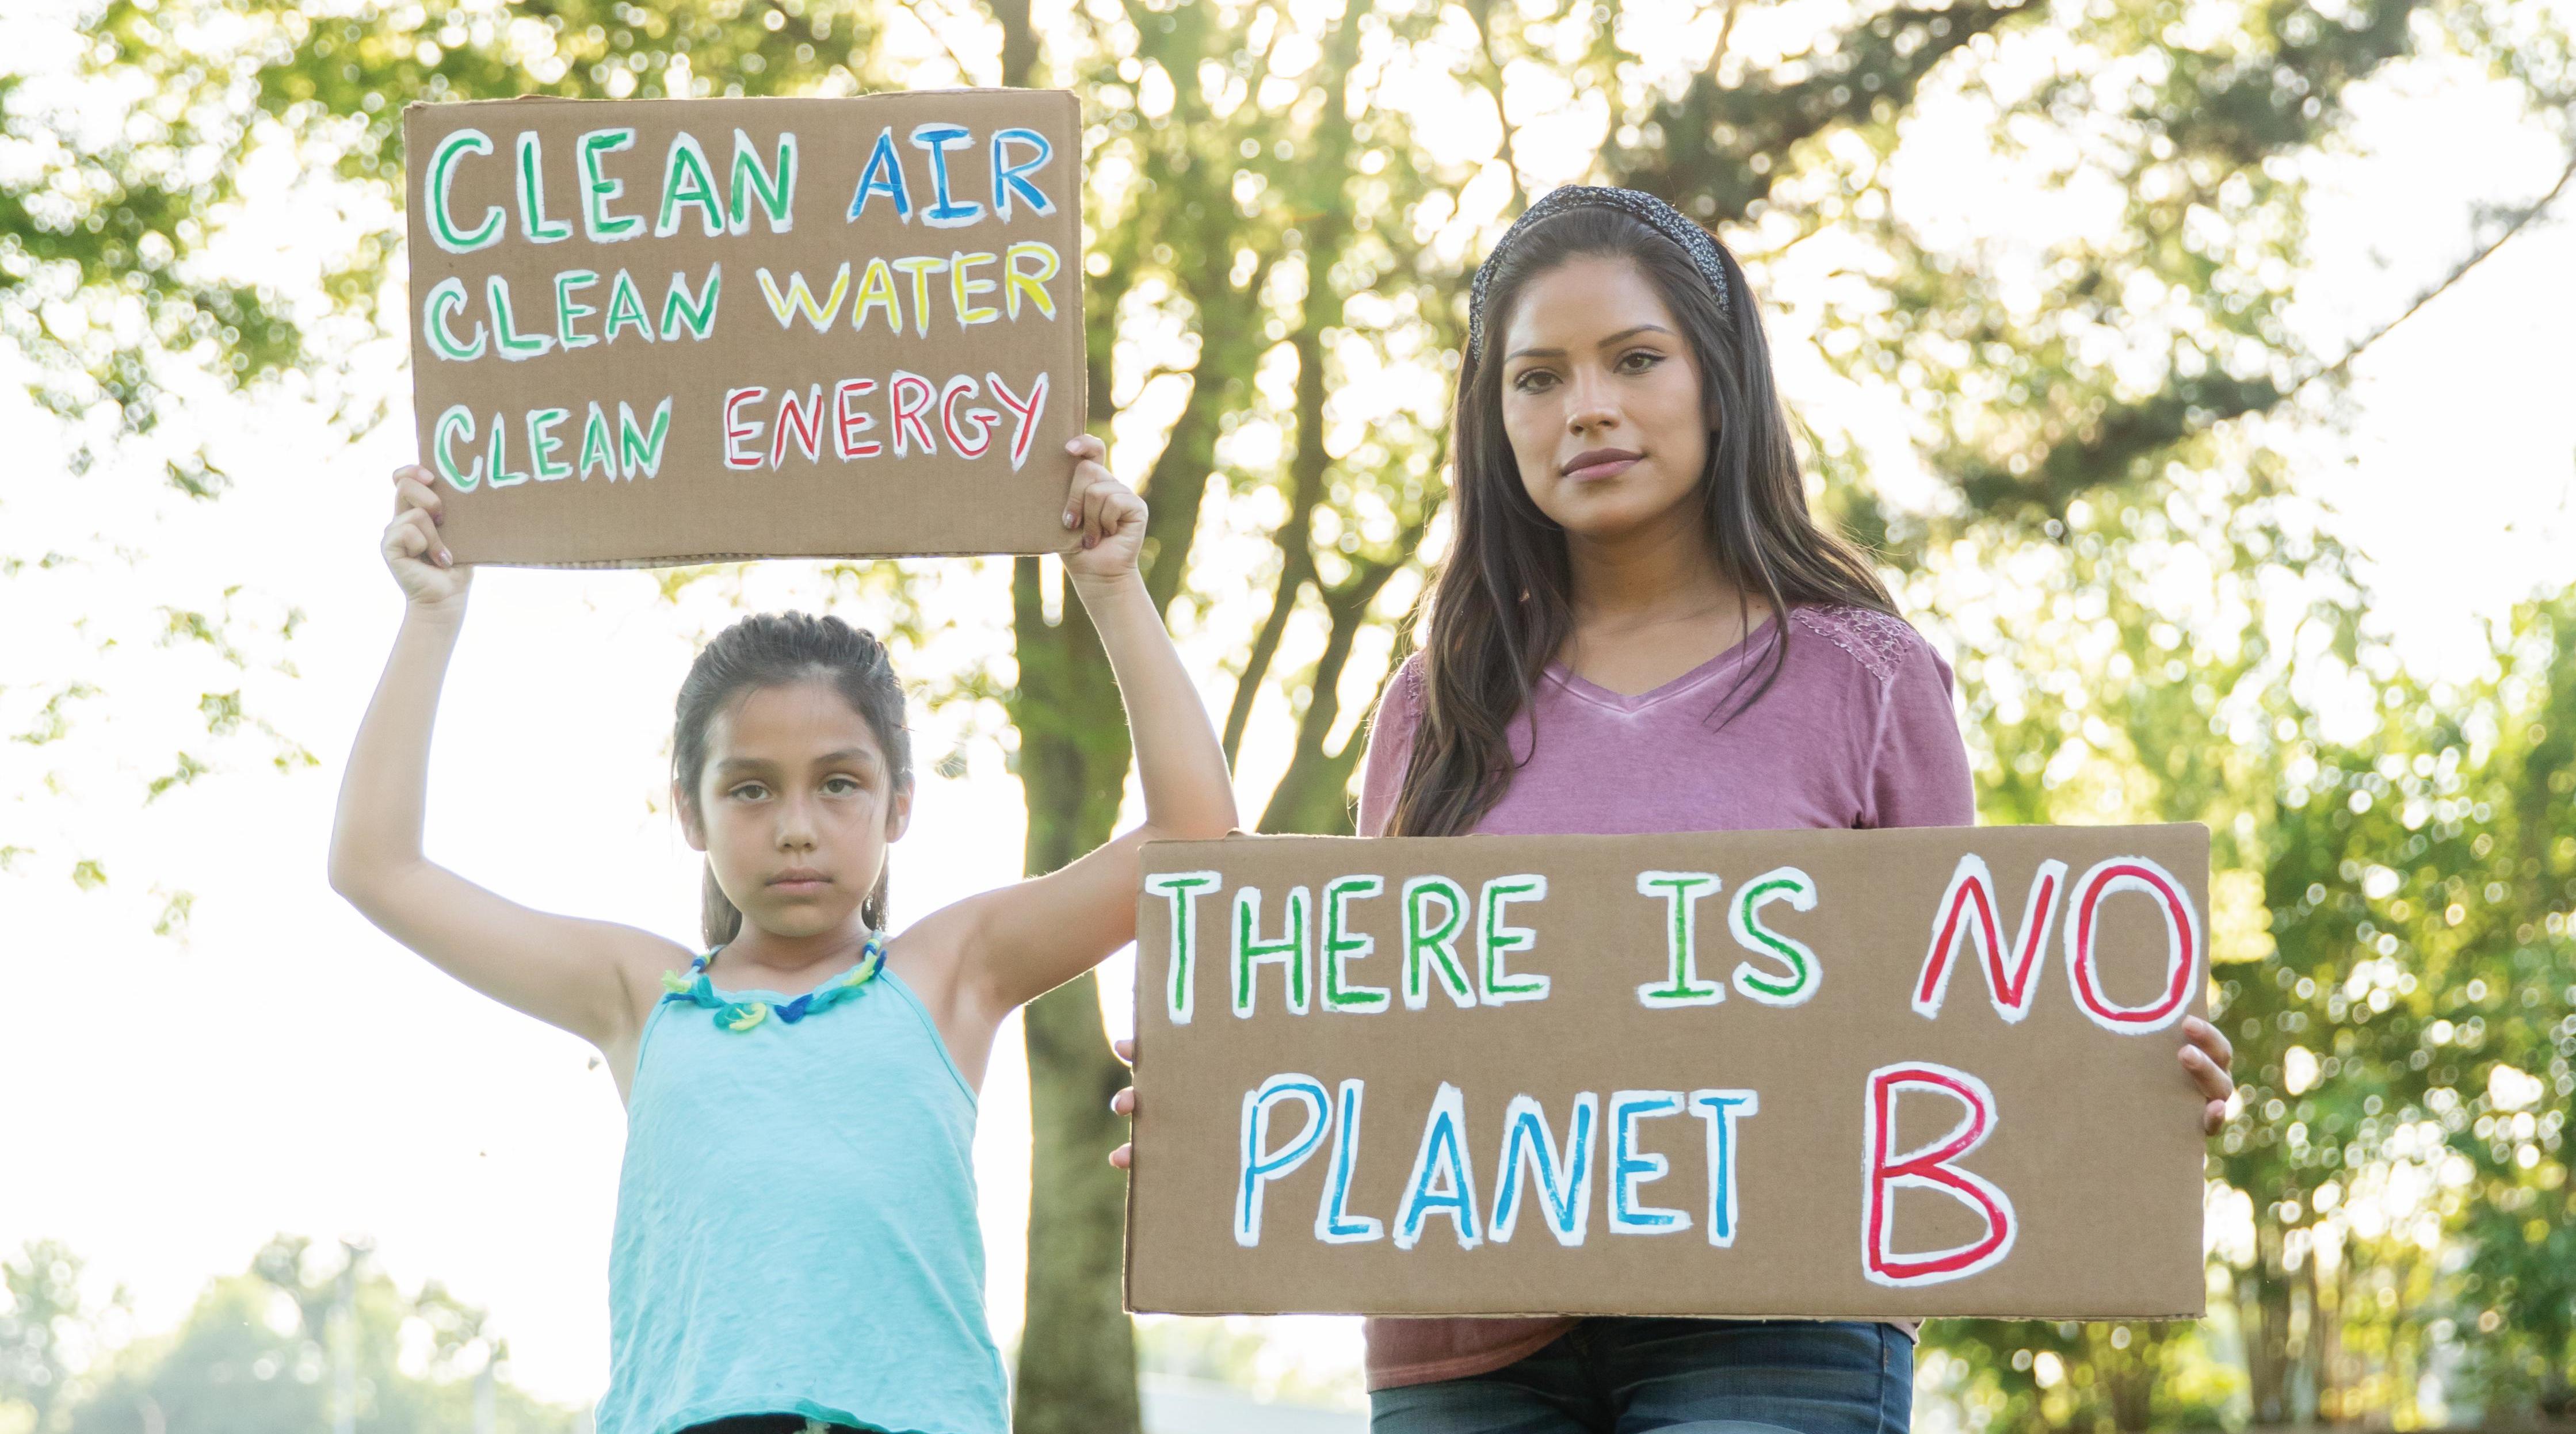 Two youth activists holding signs saying "clean air, clean water, clean energy" and "there is no planet B"